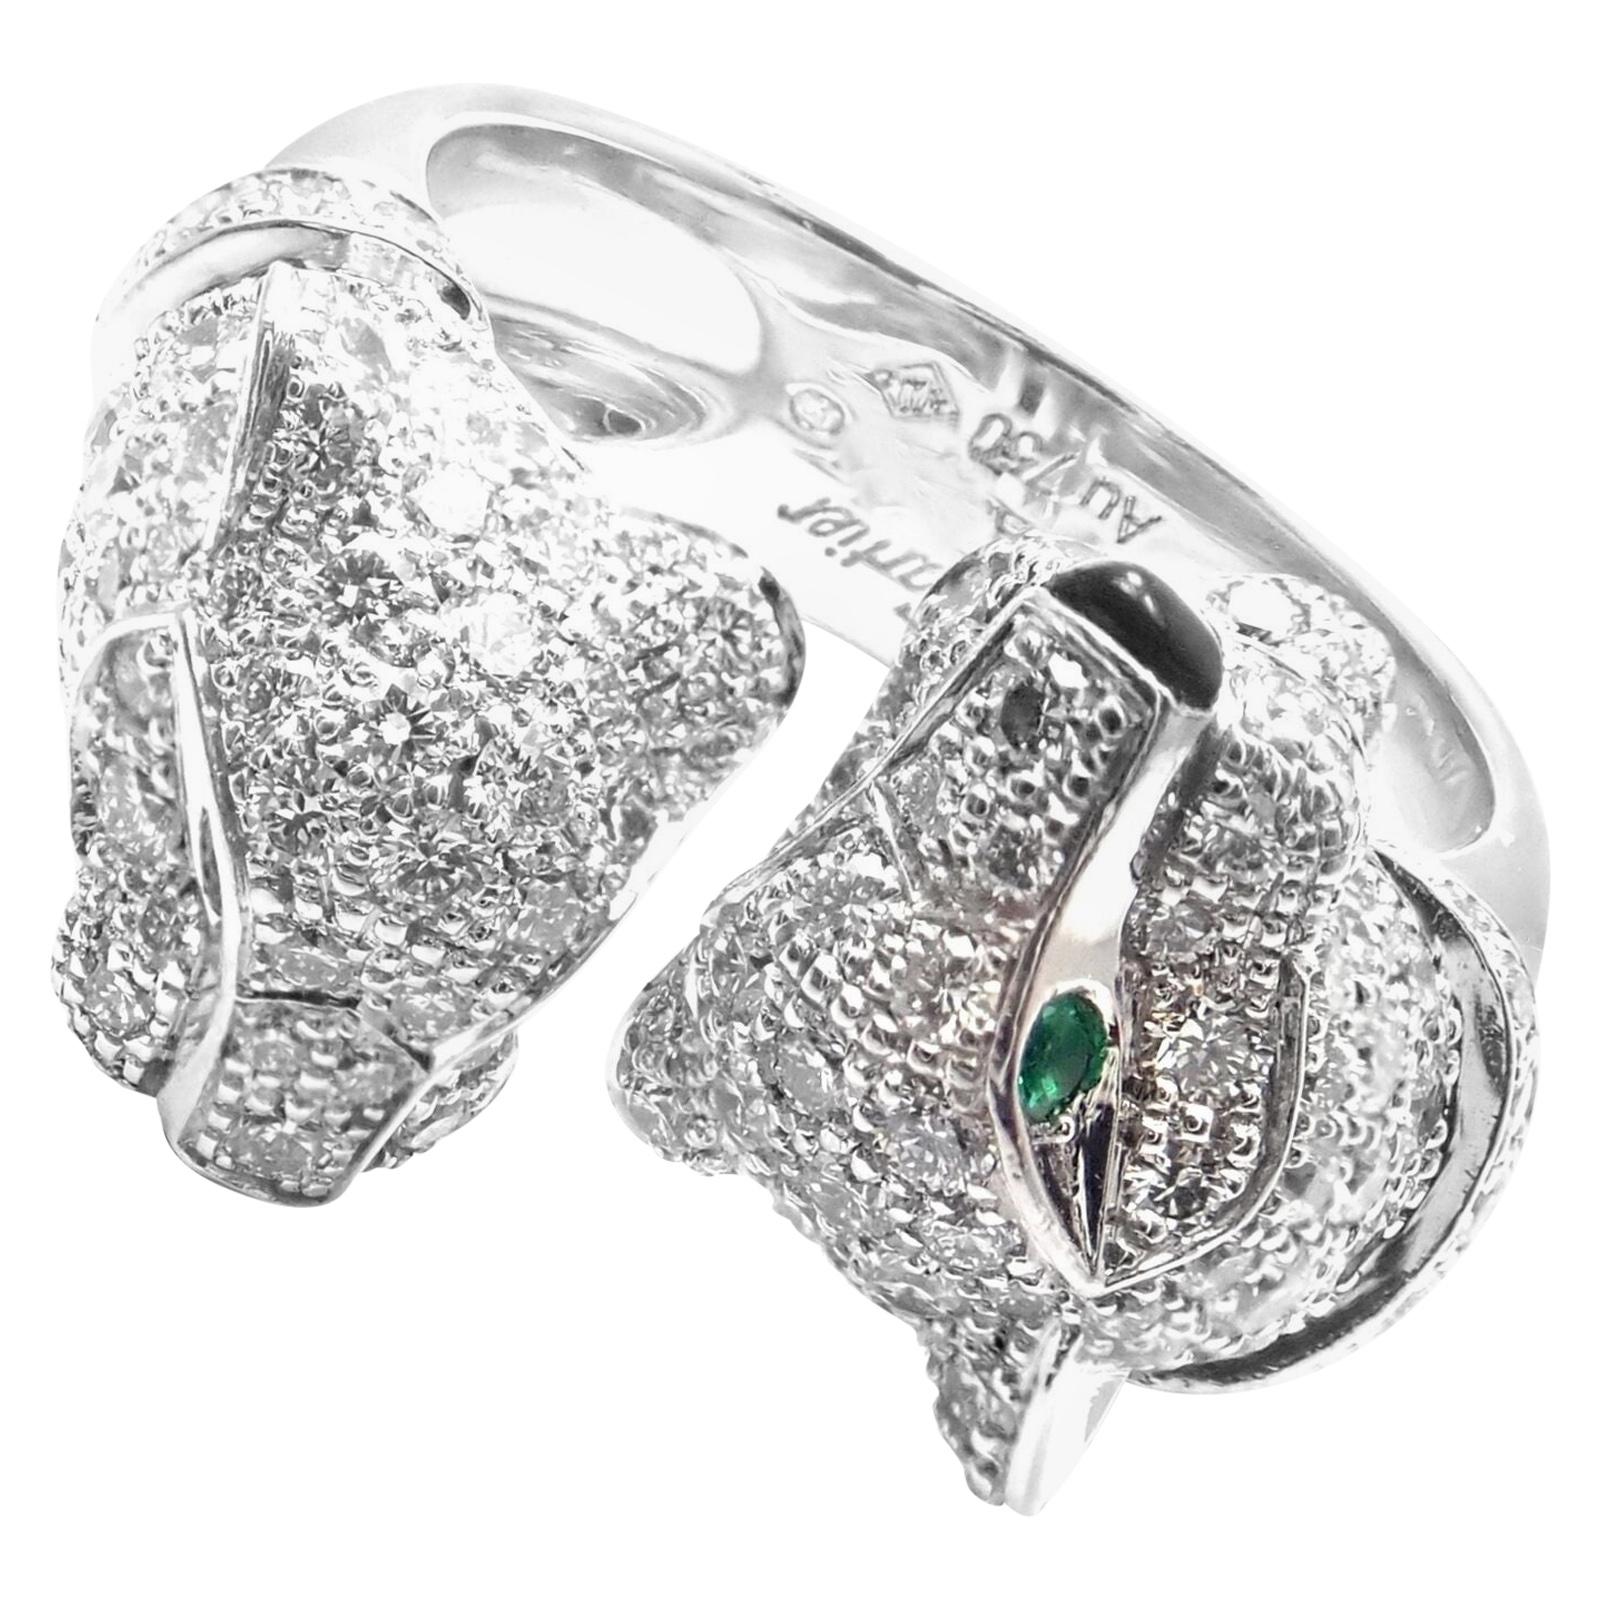 Cartier Double Panther Panthere Diamond Emerald Onyx White Gold Ring